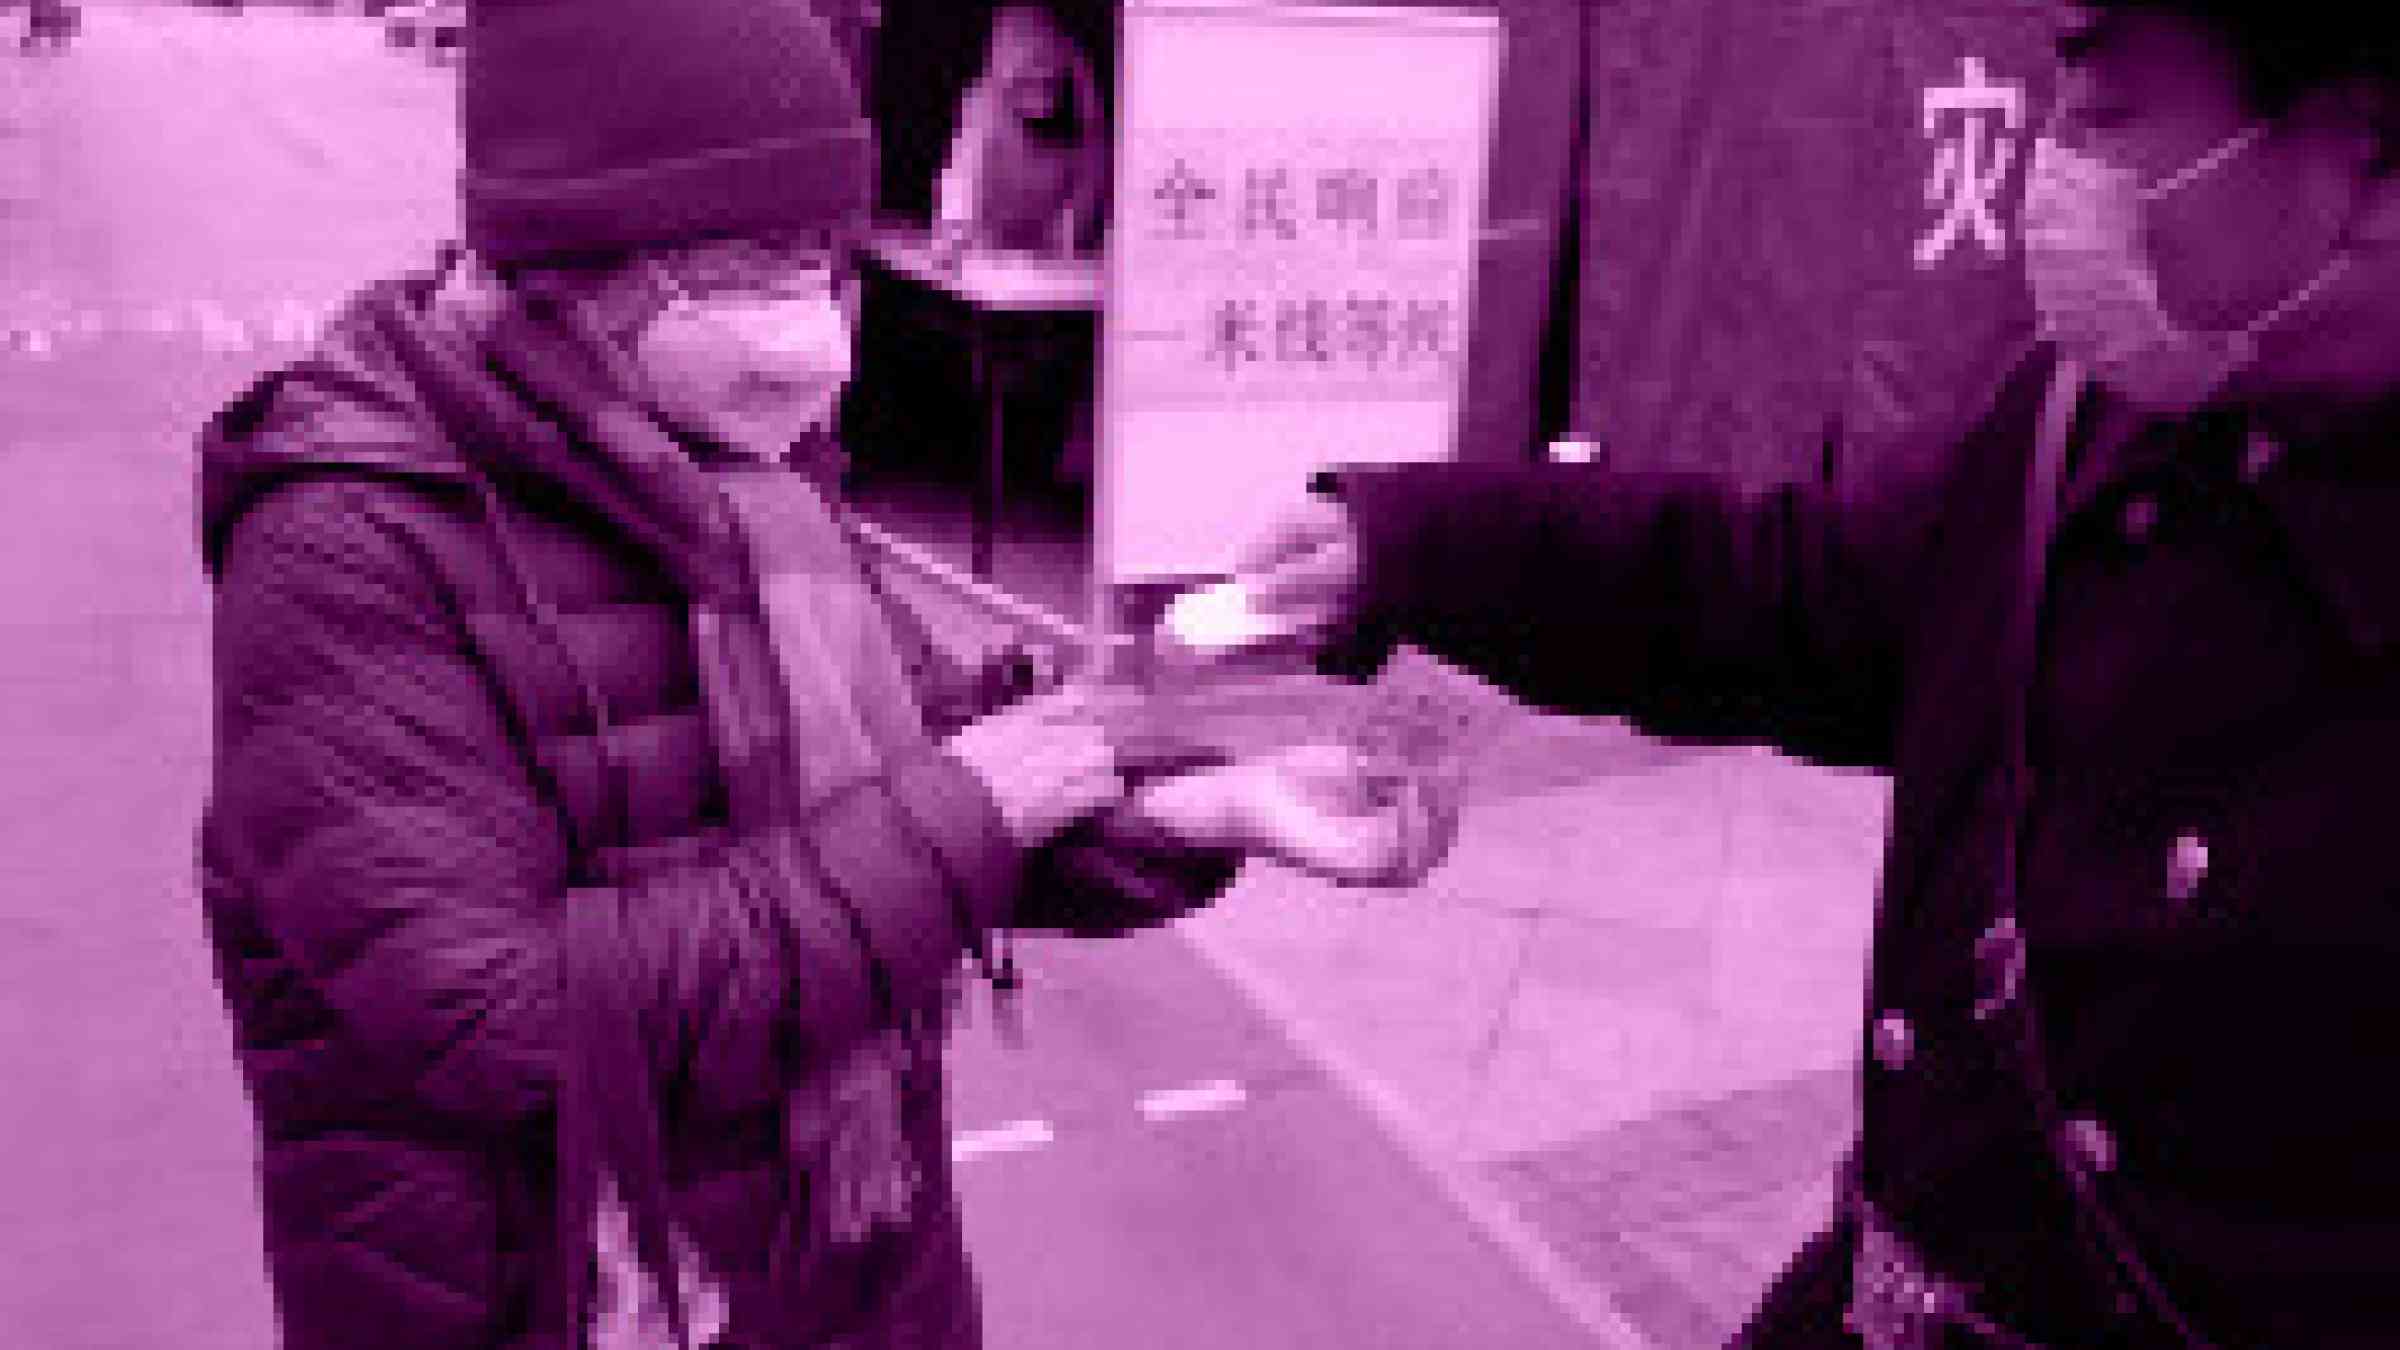 A man giving hand sanitiser to another man in a street in China